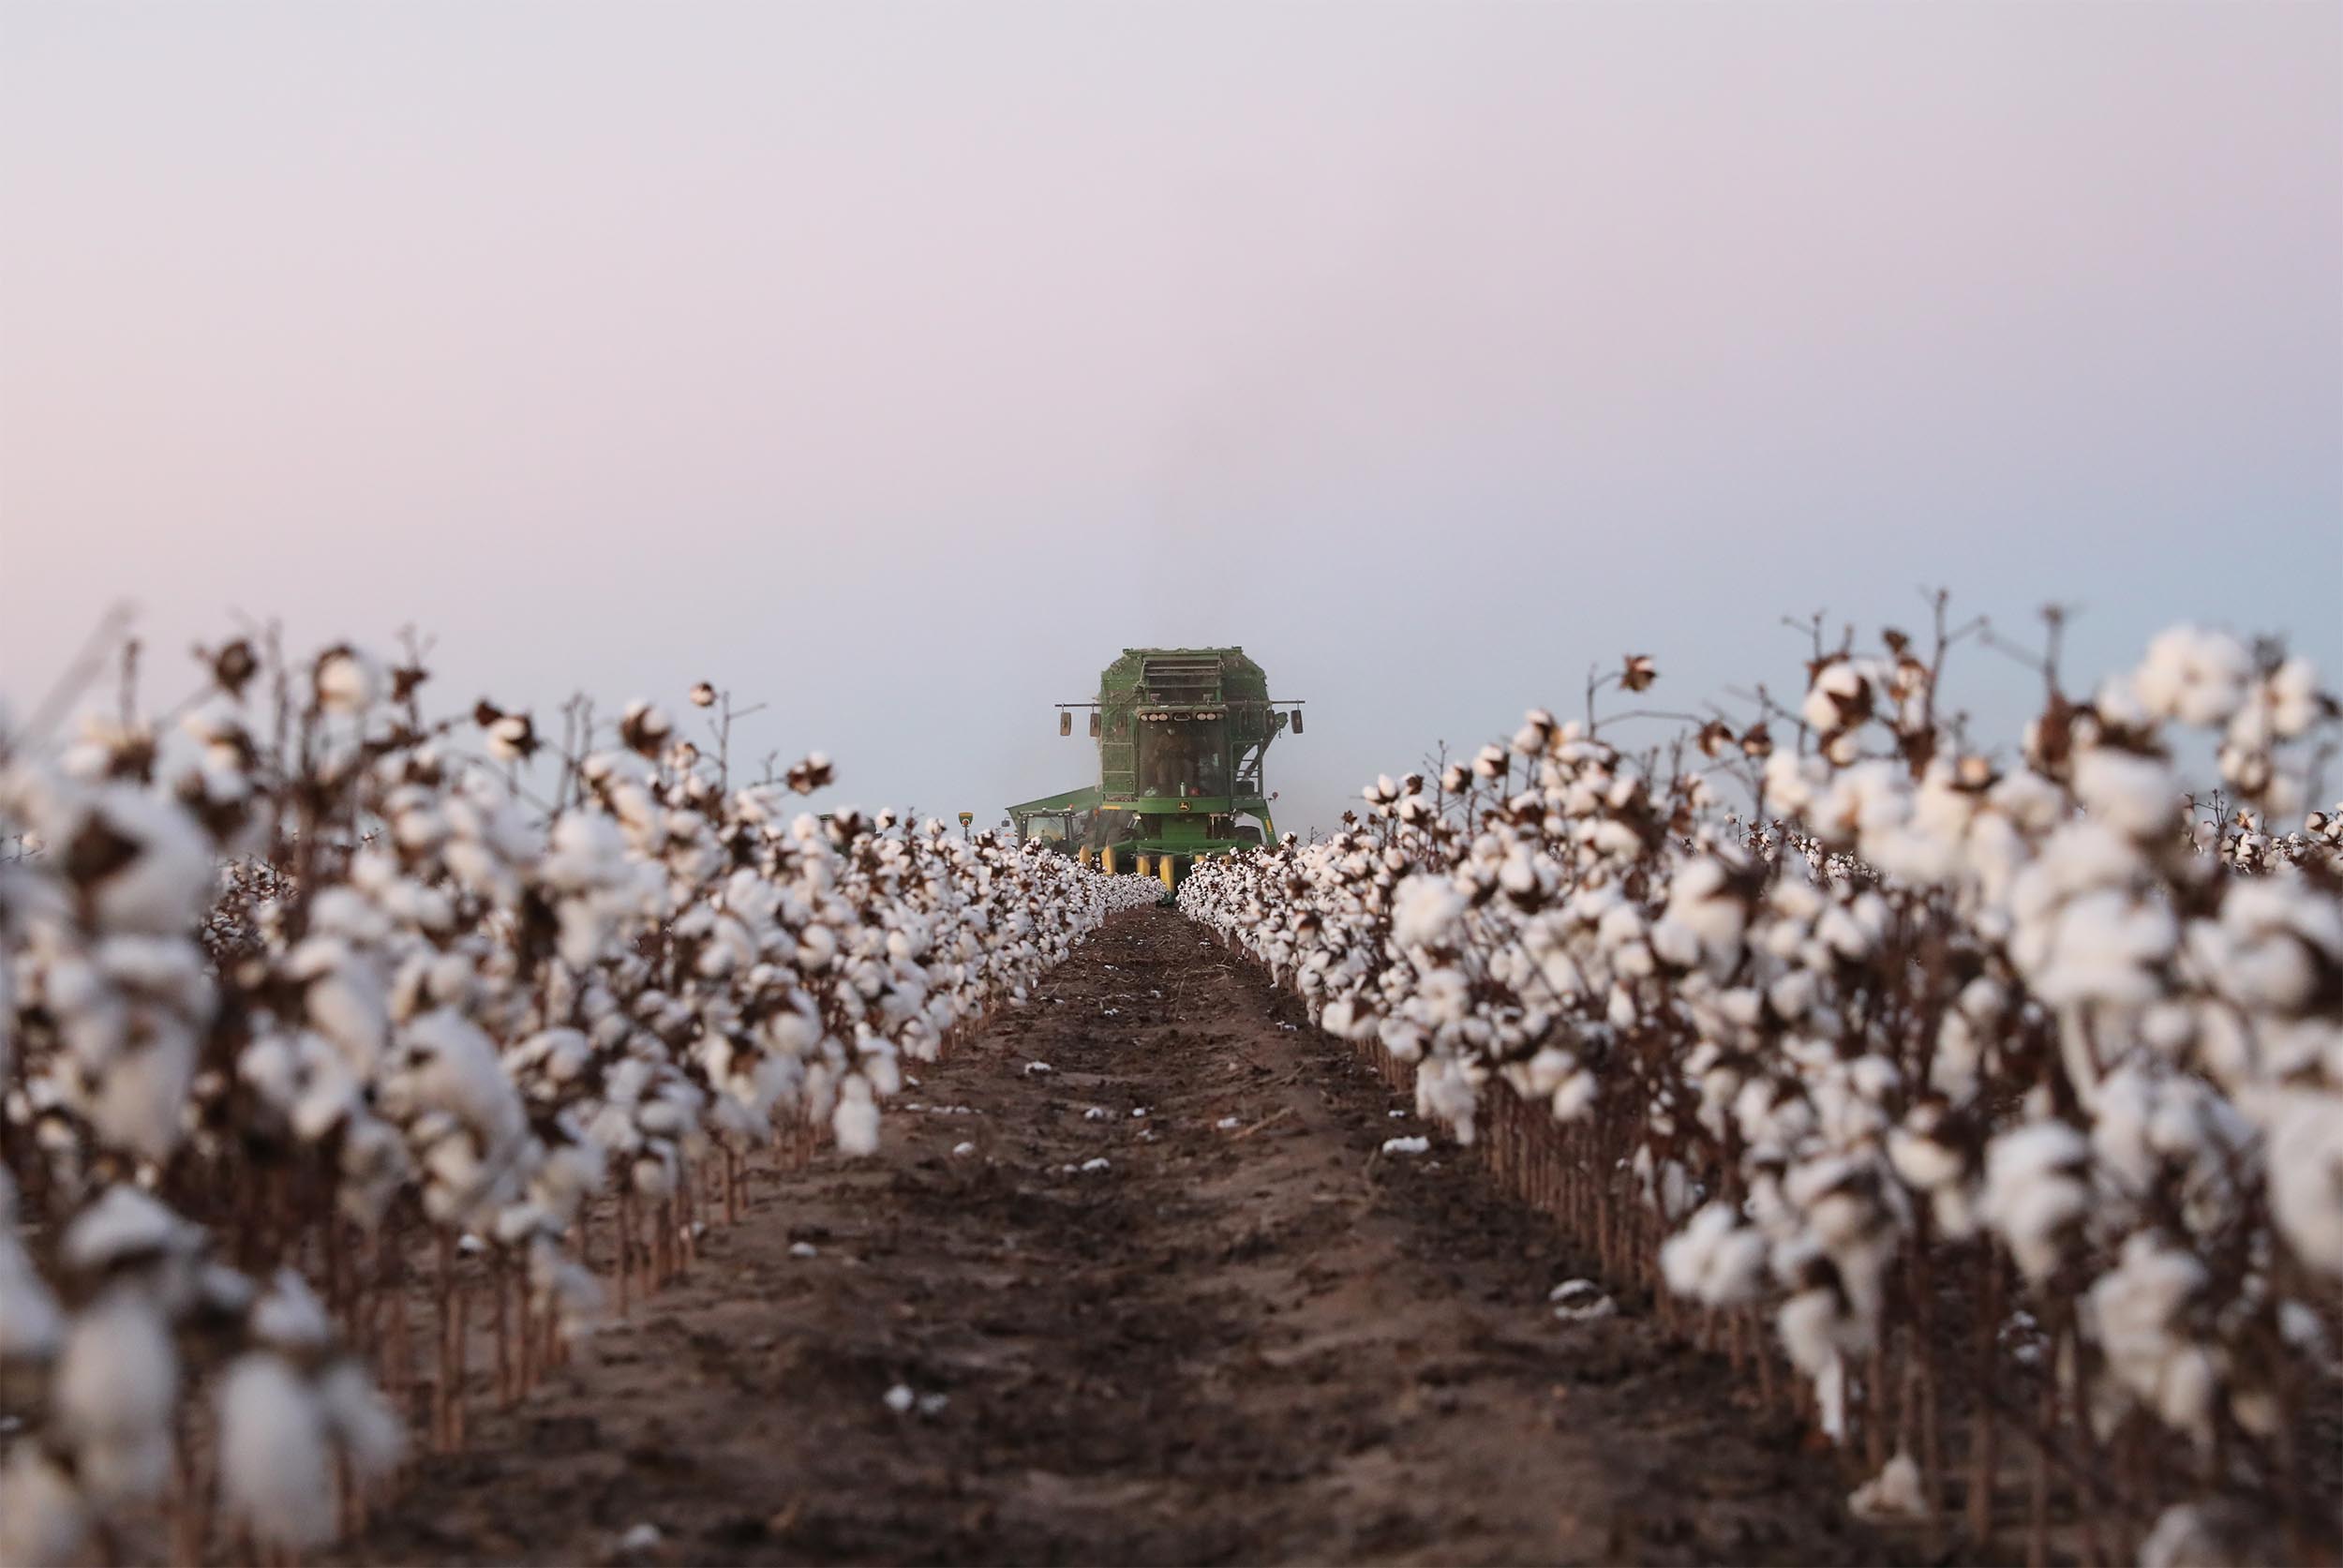 Changing weather complicating cotton outlook